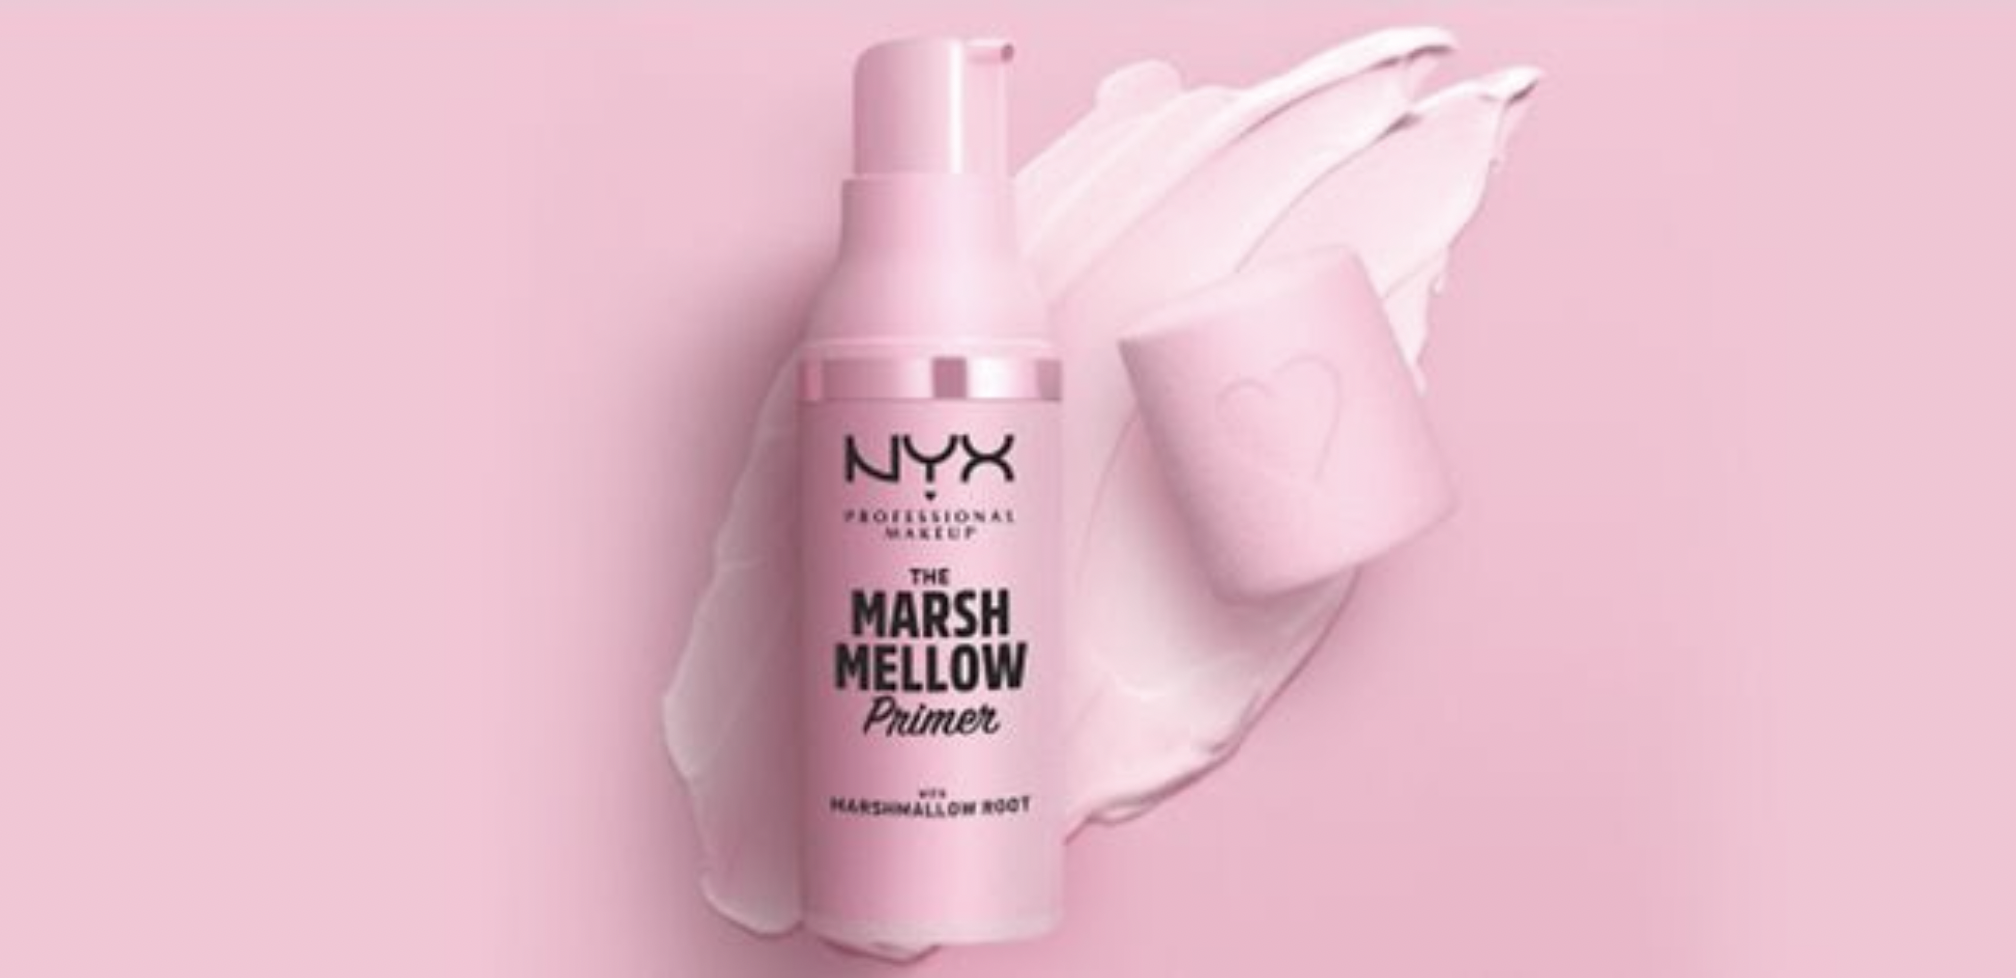 TikTok beauty product The Marshmellow Smoothing Primer against a pink background. 